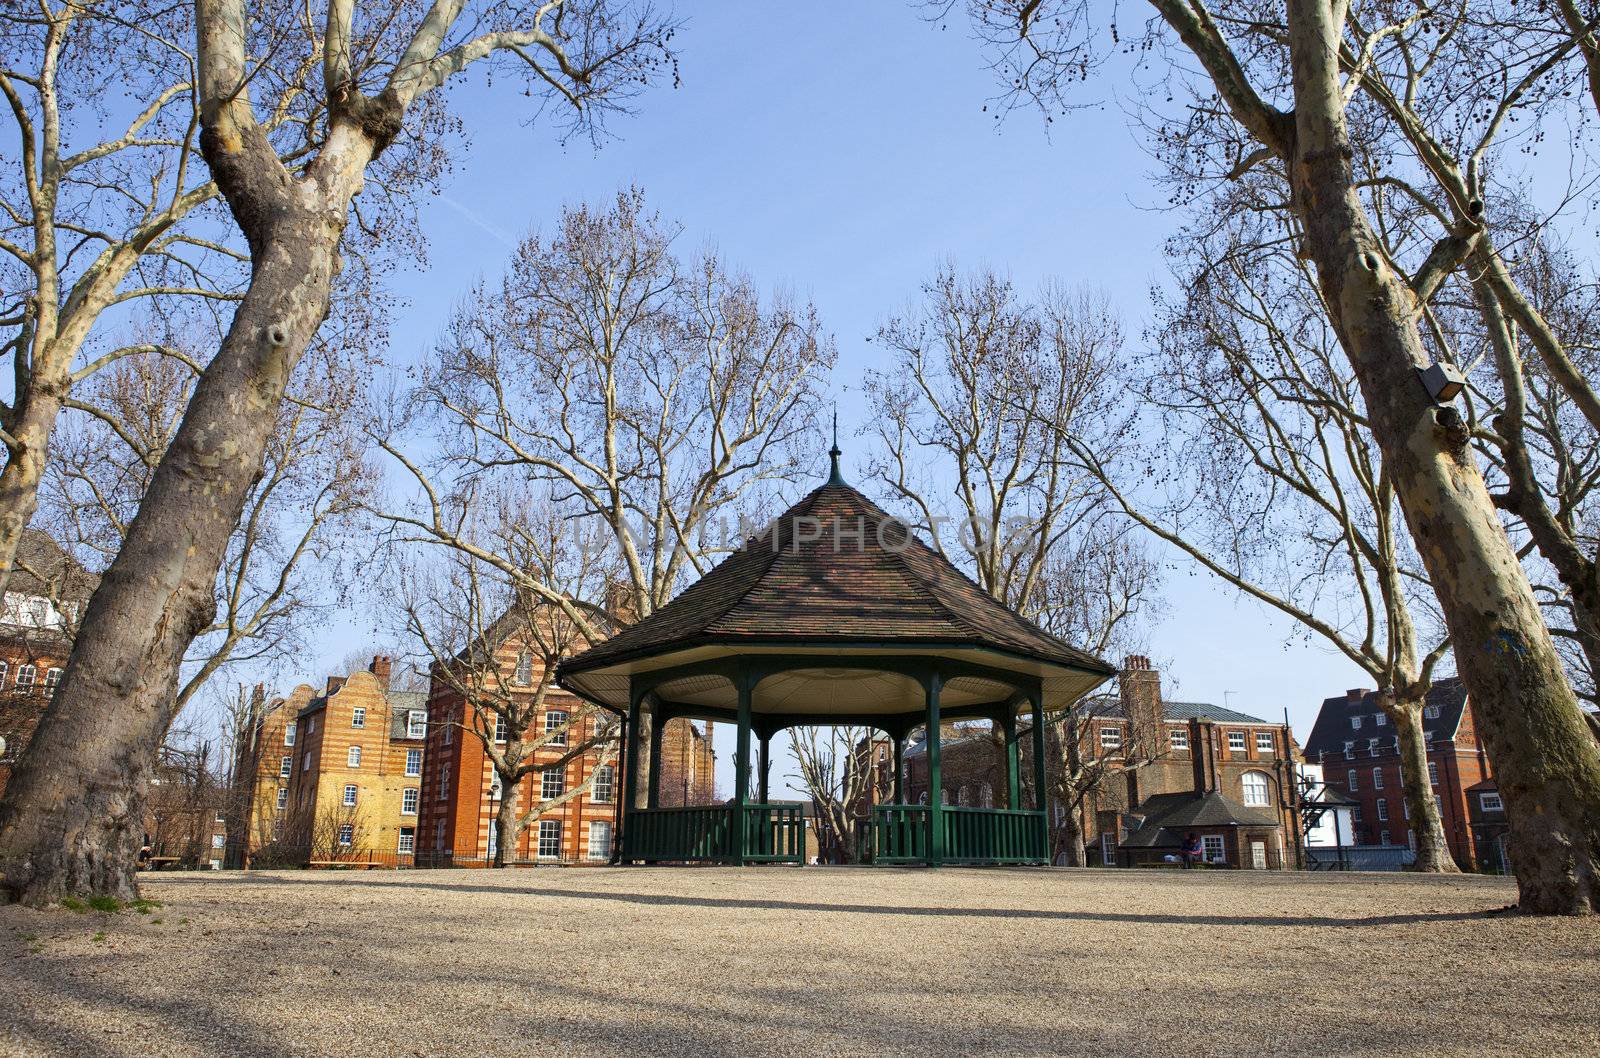 The Bandstand in Arnold Circus and the Boundary Estate in London by chrisdorney